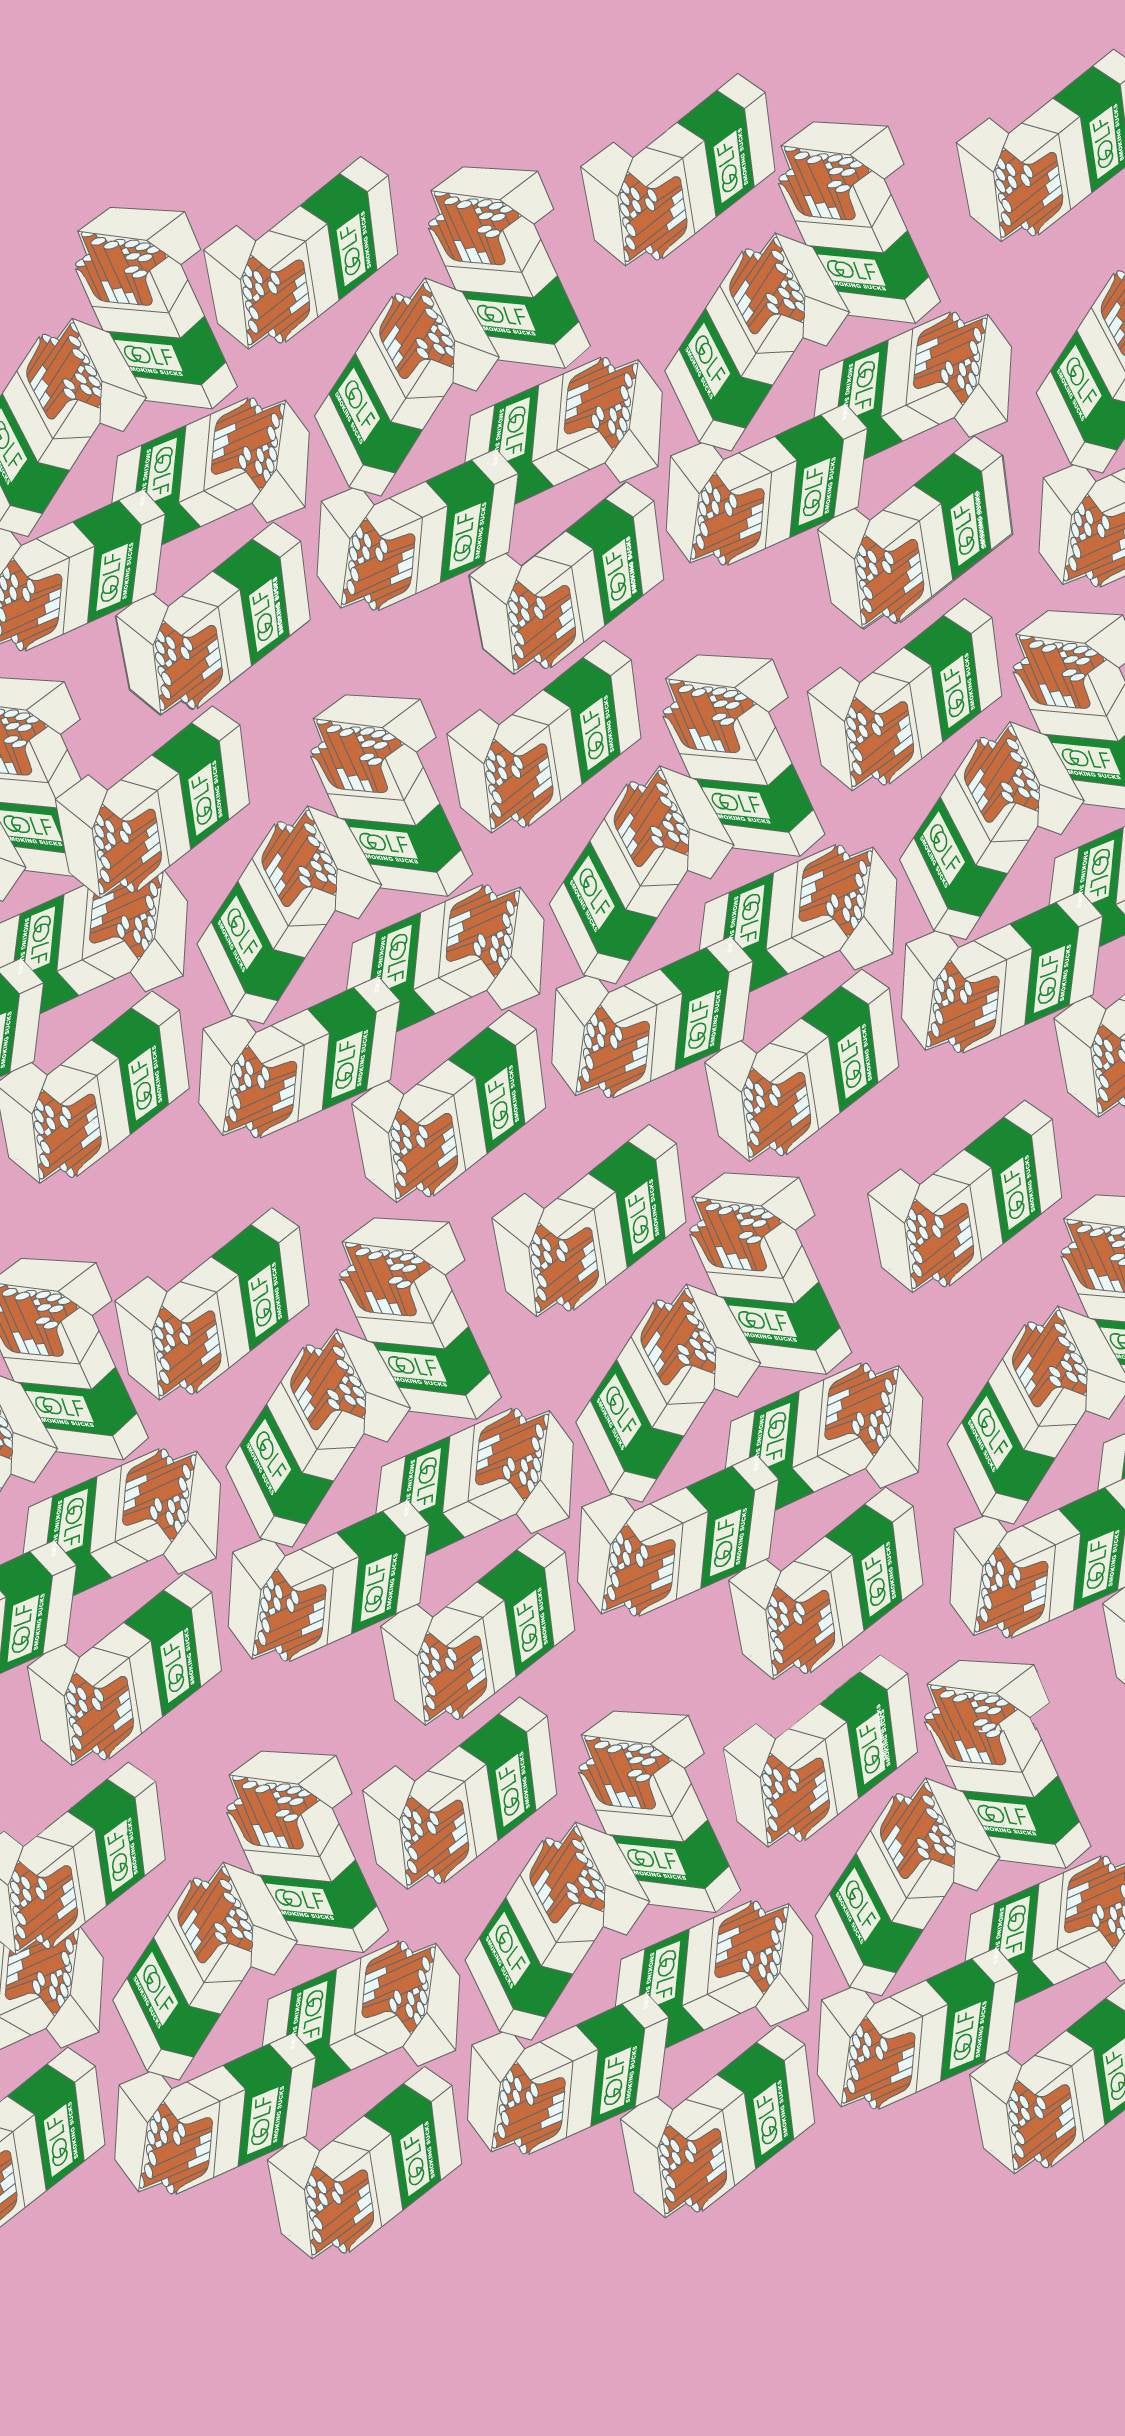 Recreated the cig pattern to use as a wallpaper rGolfwang